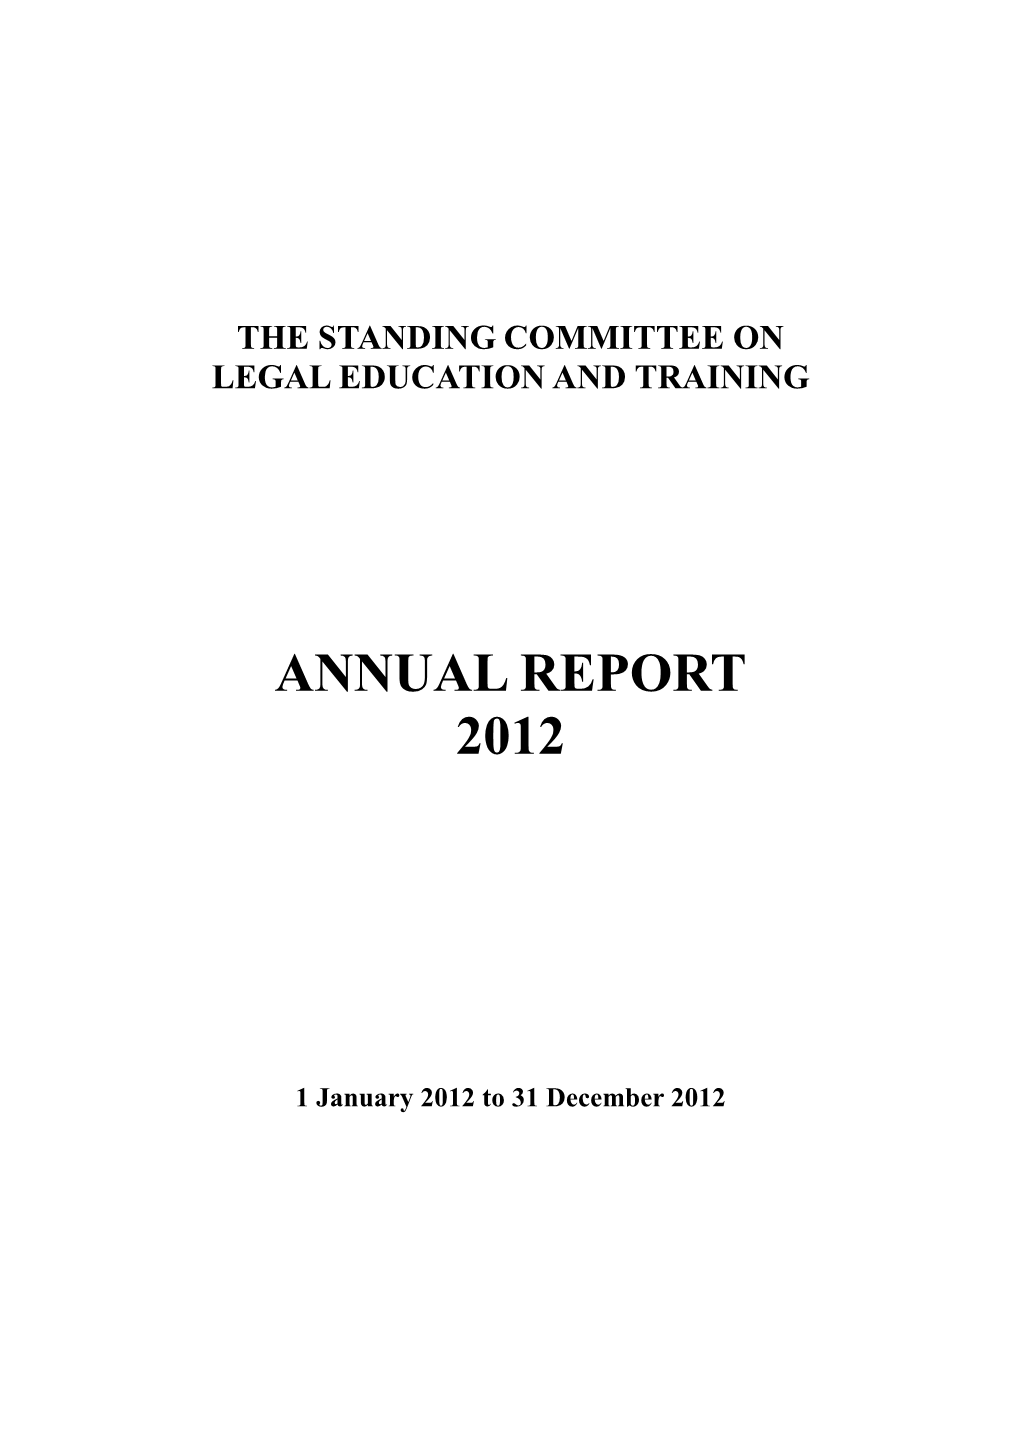 Annual Report of the Standing Committee on Legal Education and Training